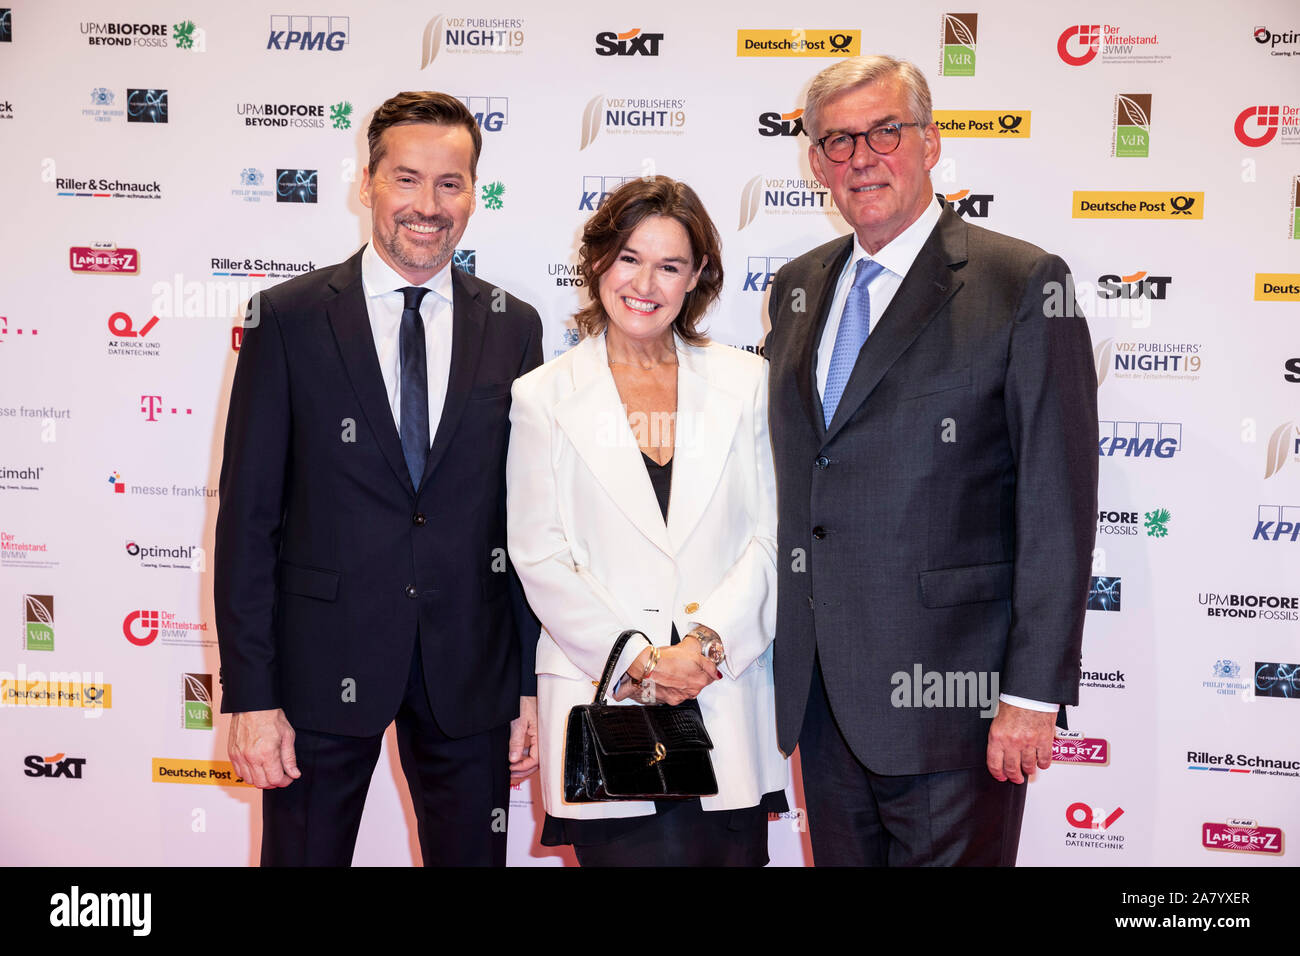 Berlin, Germany. 04th Nov, 2019. Stephan Scherzer (l), Managing Director of VDZ, Rudolf Thiemann (r), President of VDZ, and his wife Virginia Thiemann, will attend the 'VDZ Publishers' Night 2019 - Gala of Magazine Publishers' at Deutsche Telekom's Capital Representative Office. President of the Bundestag Schäuble is awarded the 'Honorary Victoria' and Reporters Without Borders the 'Golden Victoria 2019 for Press Freedom'. VDZ Publishers' Summit and Gala form the largest network event of the Association of German Magazine Publishers (VDZ). Credit: Christoph Soeder/dpa/Alamy Live News Stock Photo